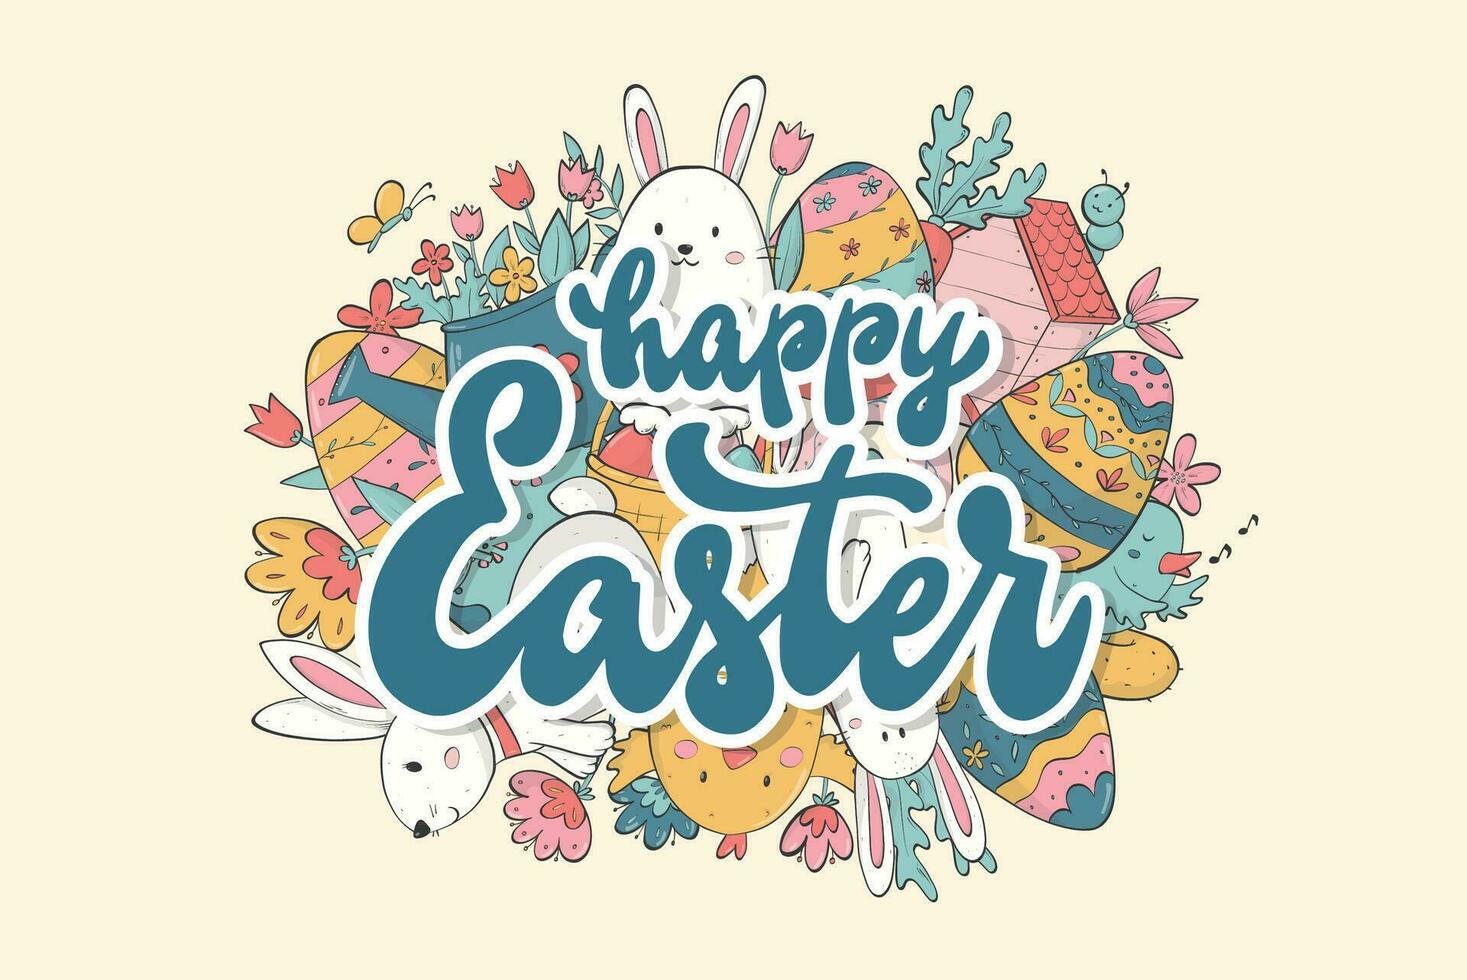 Happy Easter lettering quote decorated with doodles for greeting cards, posters, prints, banners, invitations, sublimation, stickers, etc. EPS 10 vector